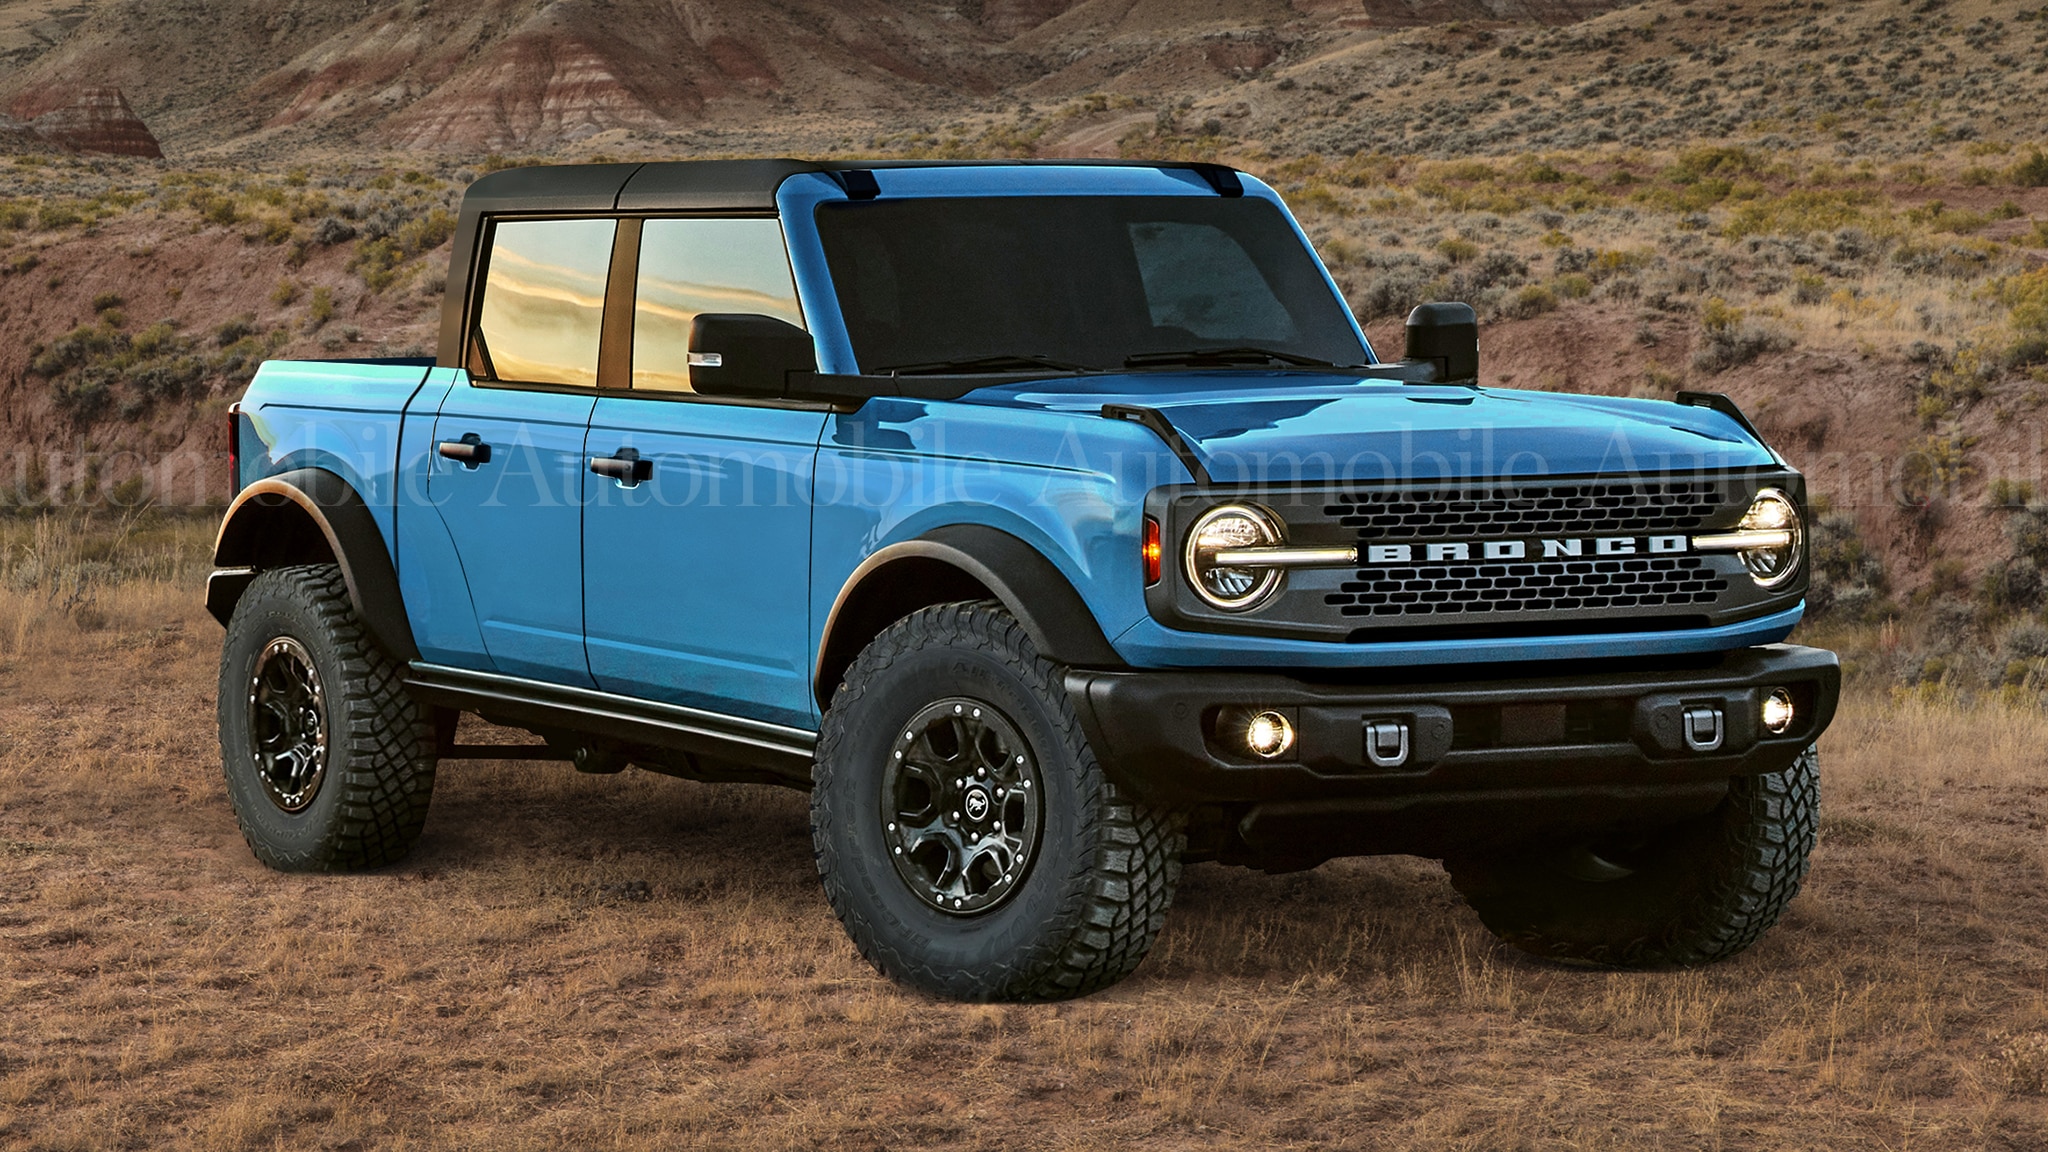 2025 Bronco Pickup details from sources close to the project (by